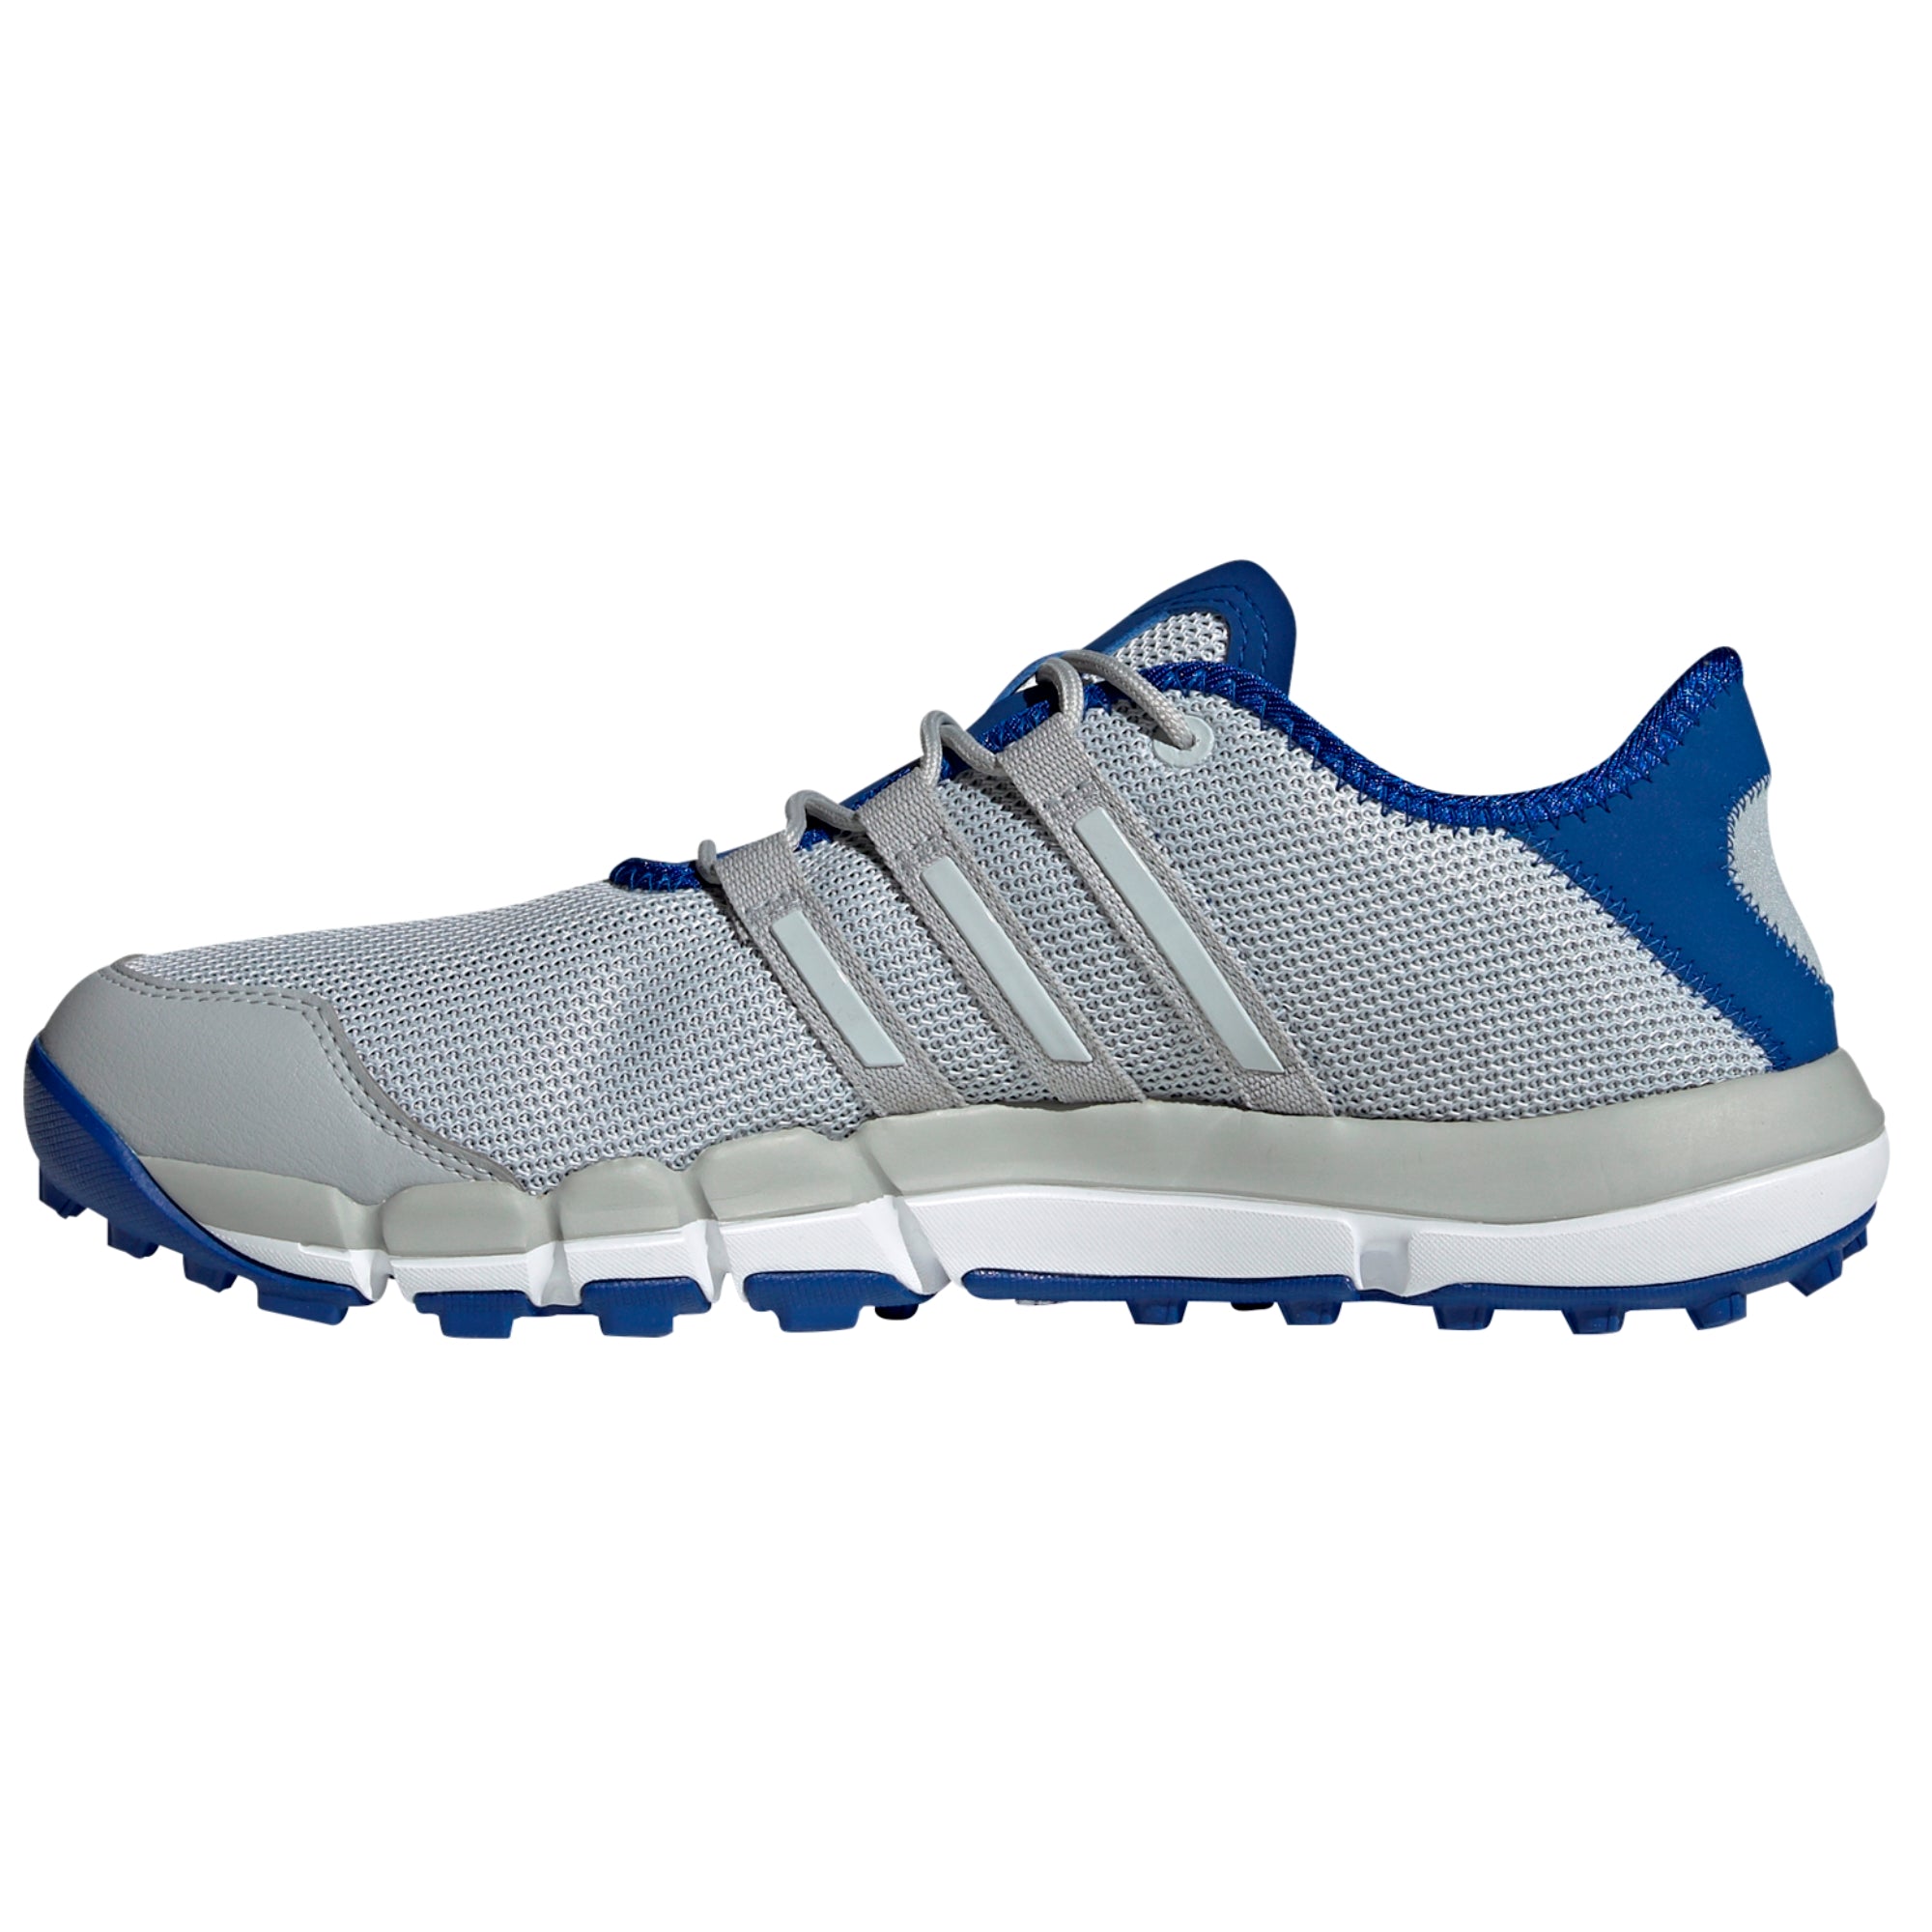 adidas climacool st golf shoes review